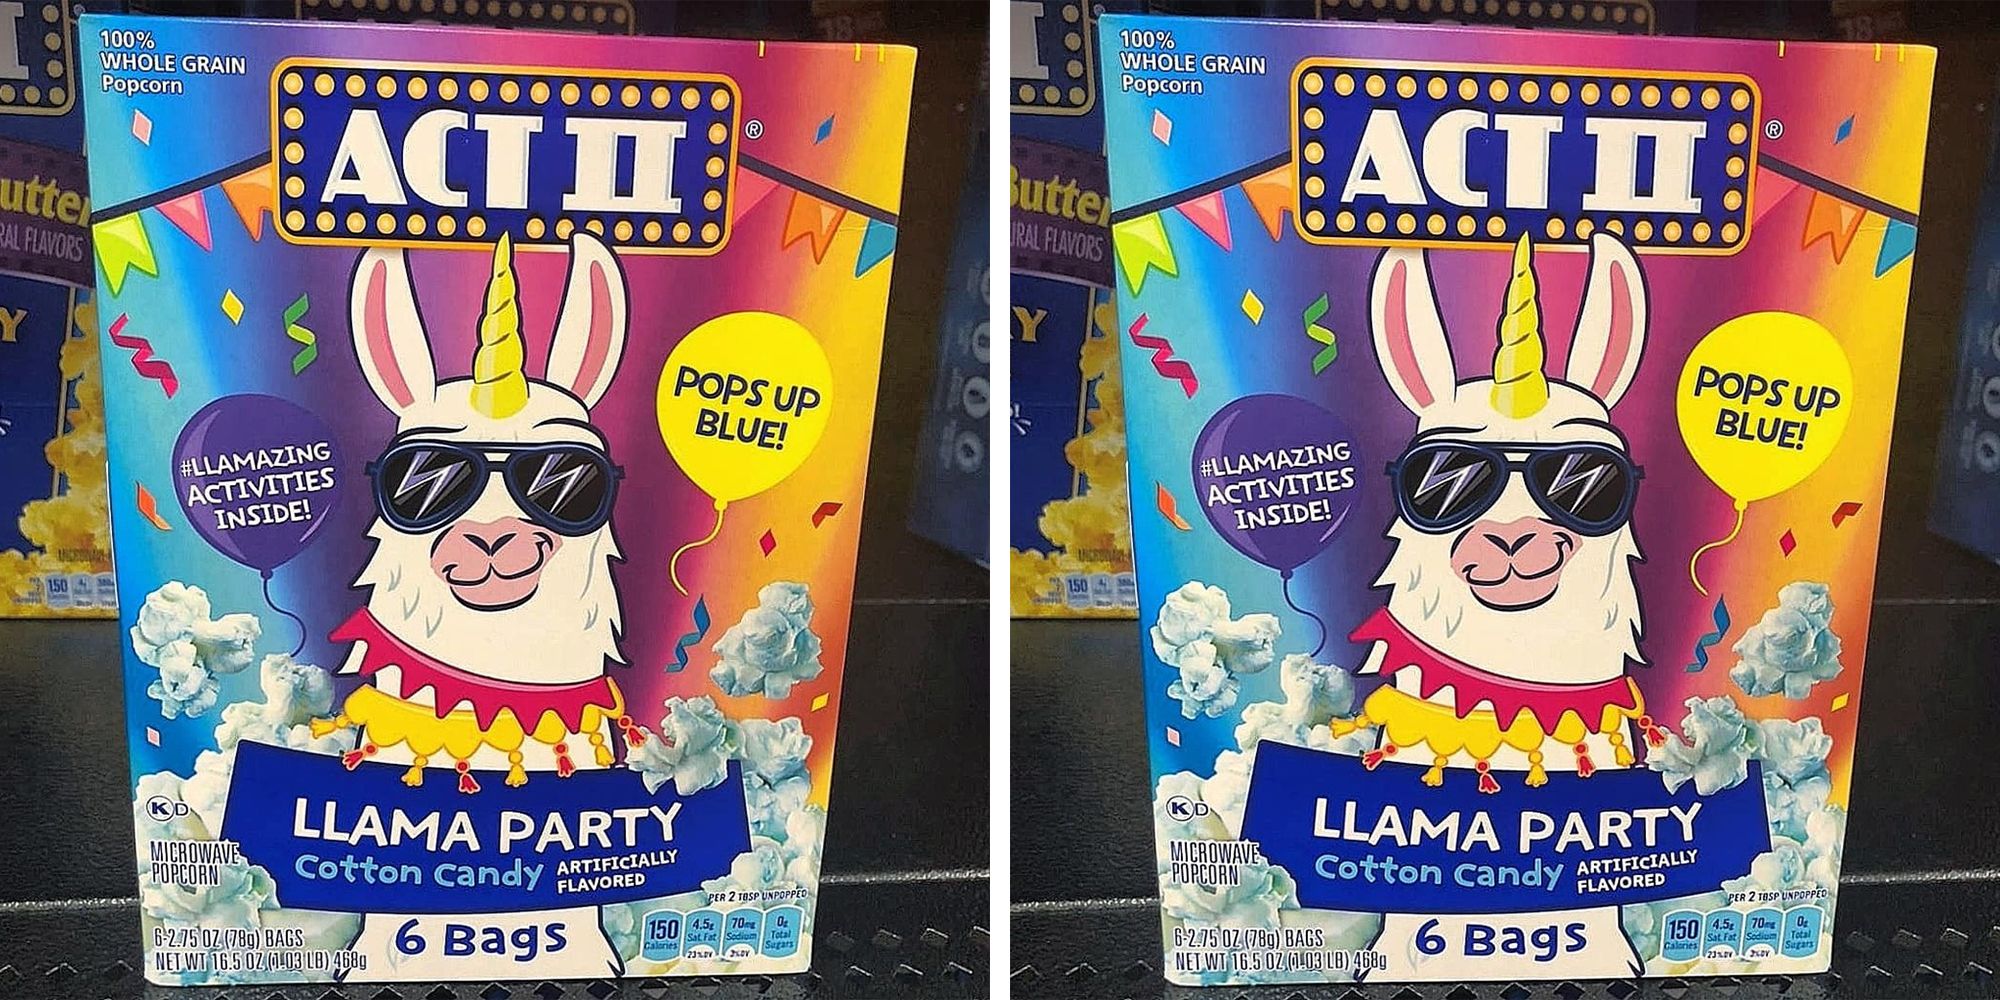 Act II's Cotton Candy-Flavored Popcorn Will Give You All the